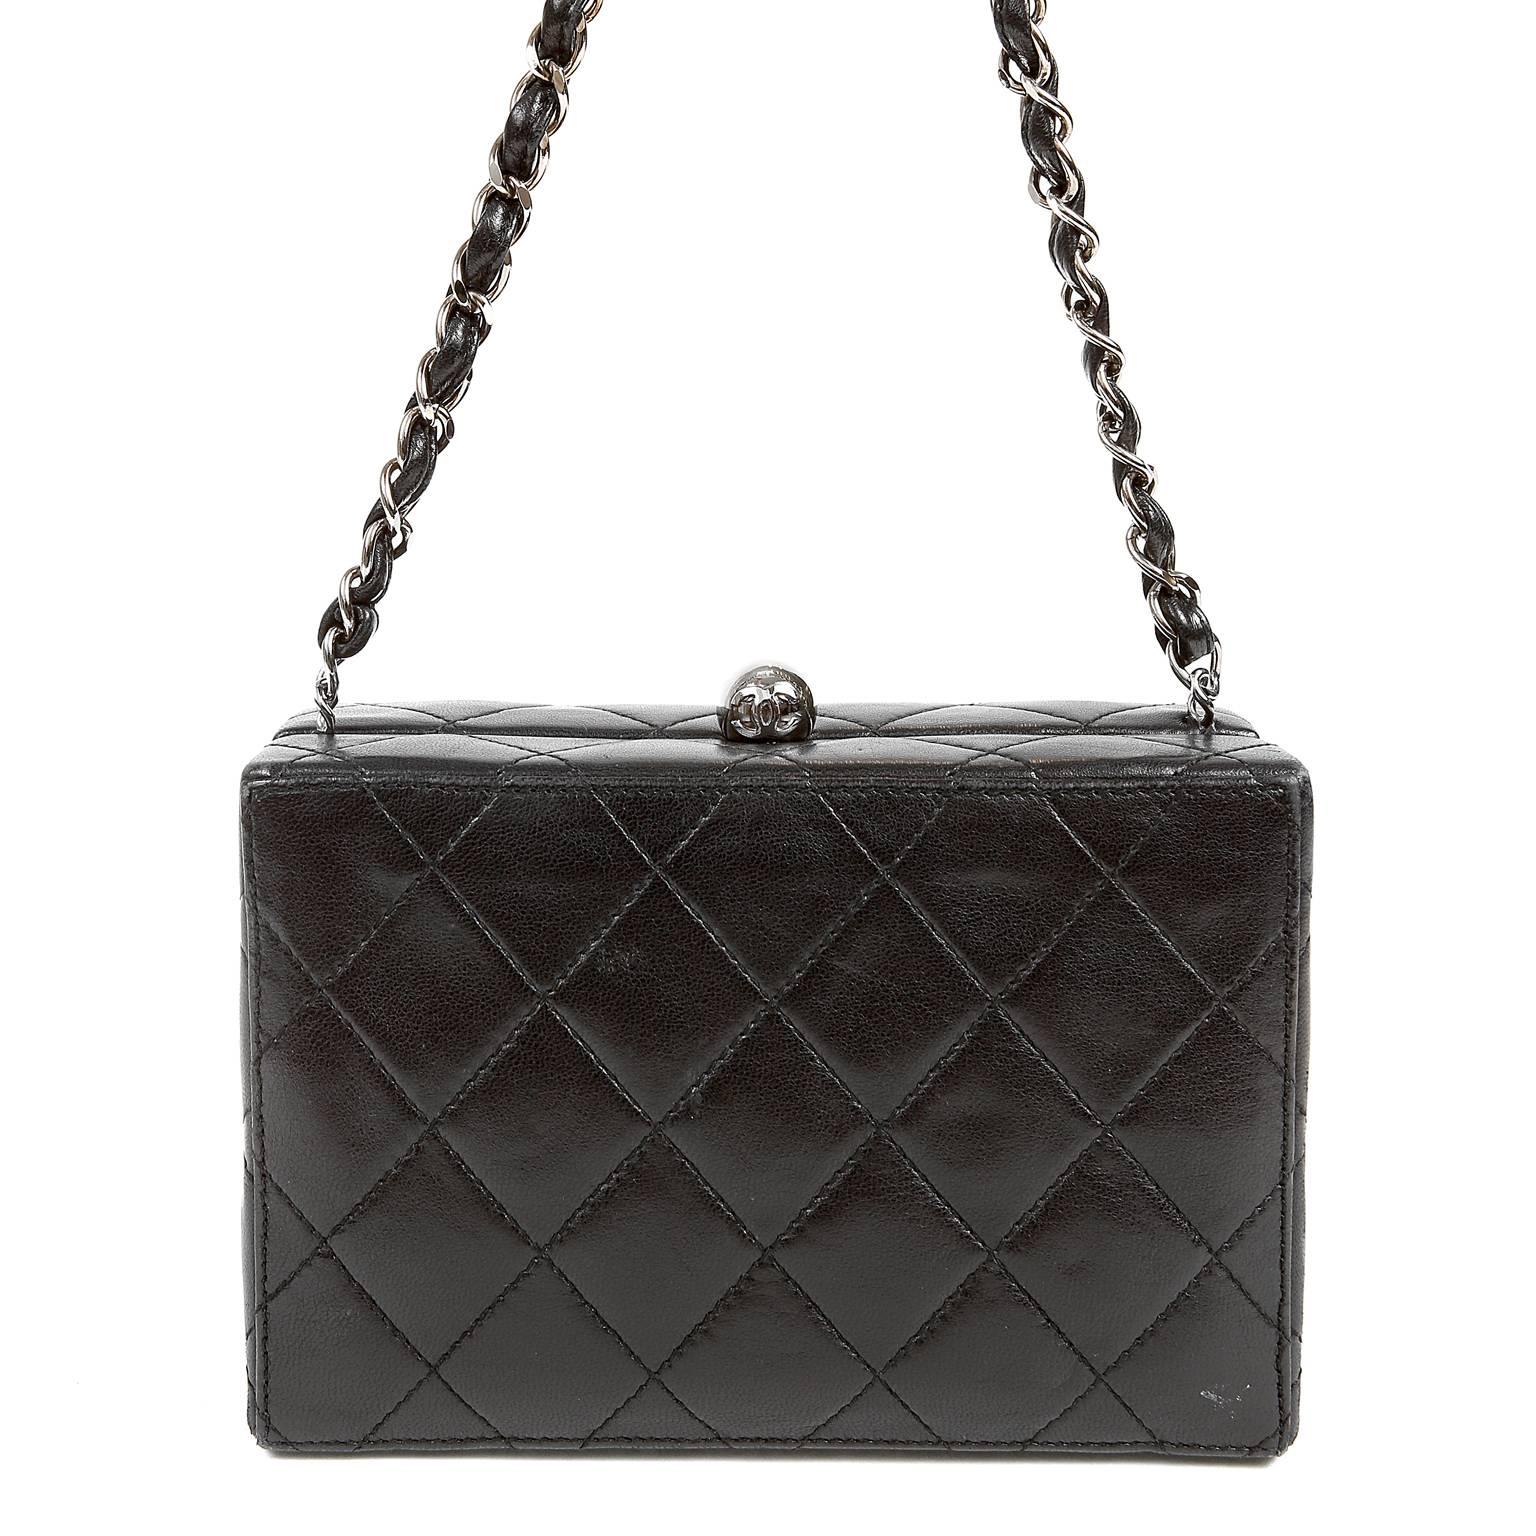 Chanel Black Quilted Leather Mini Box Bag For Sale 5